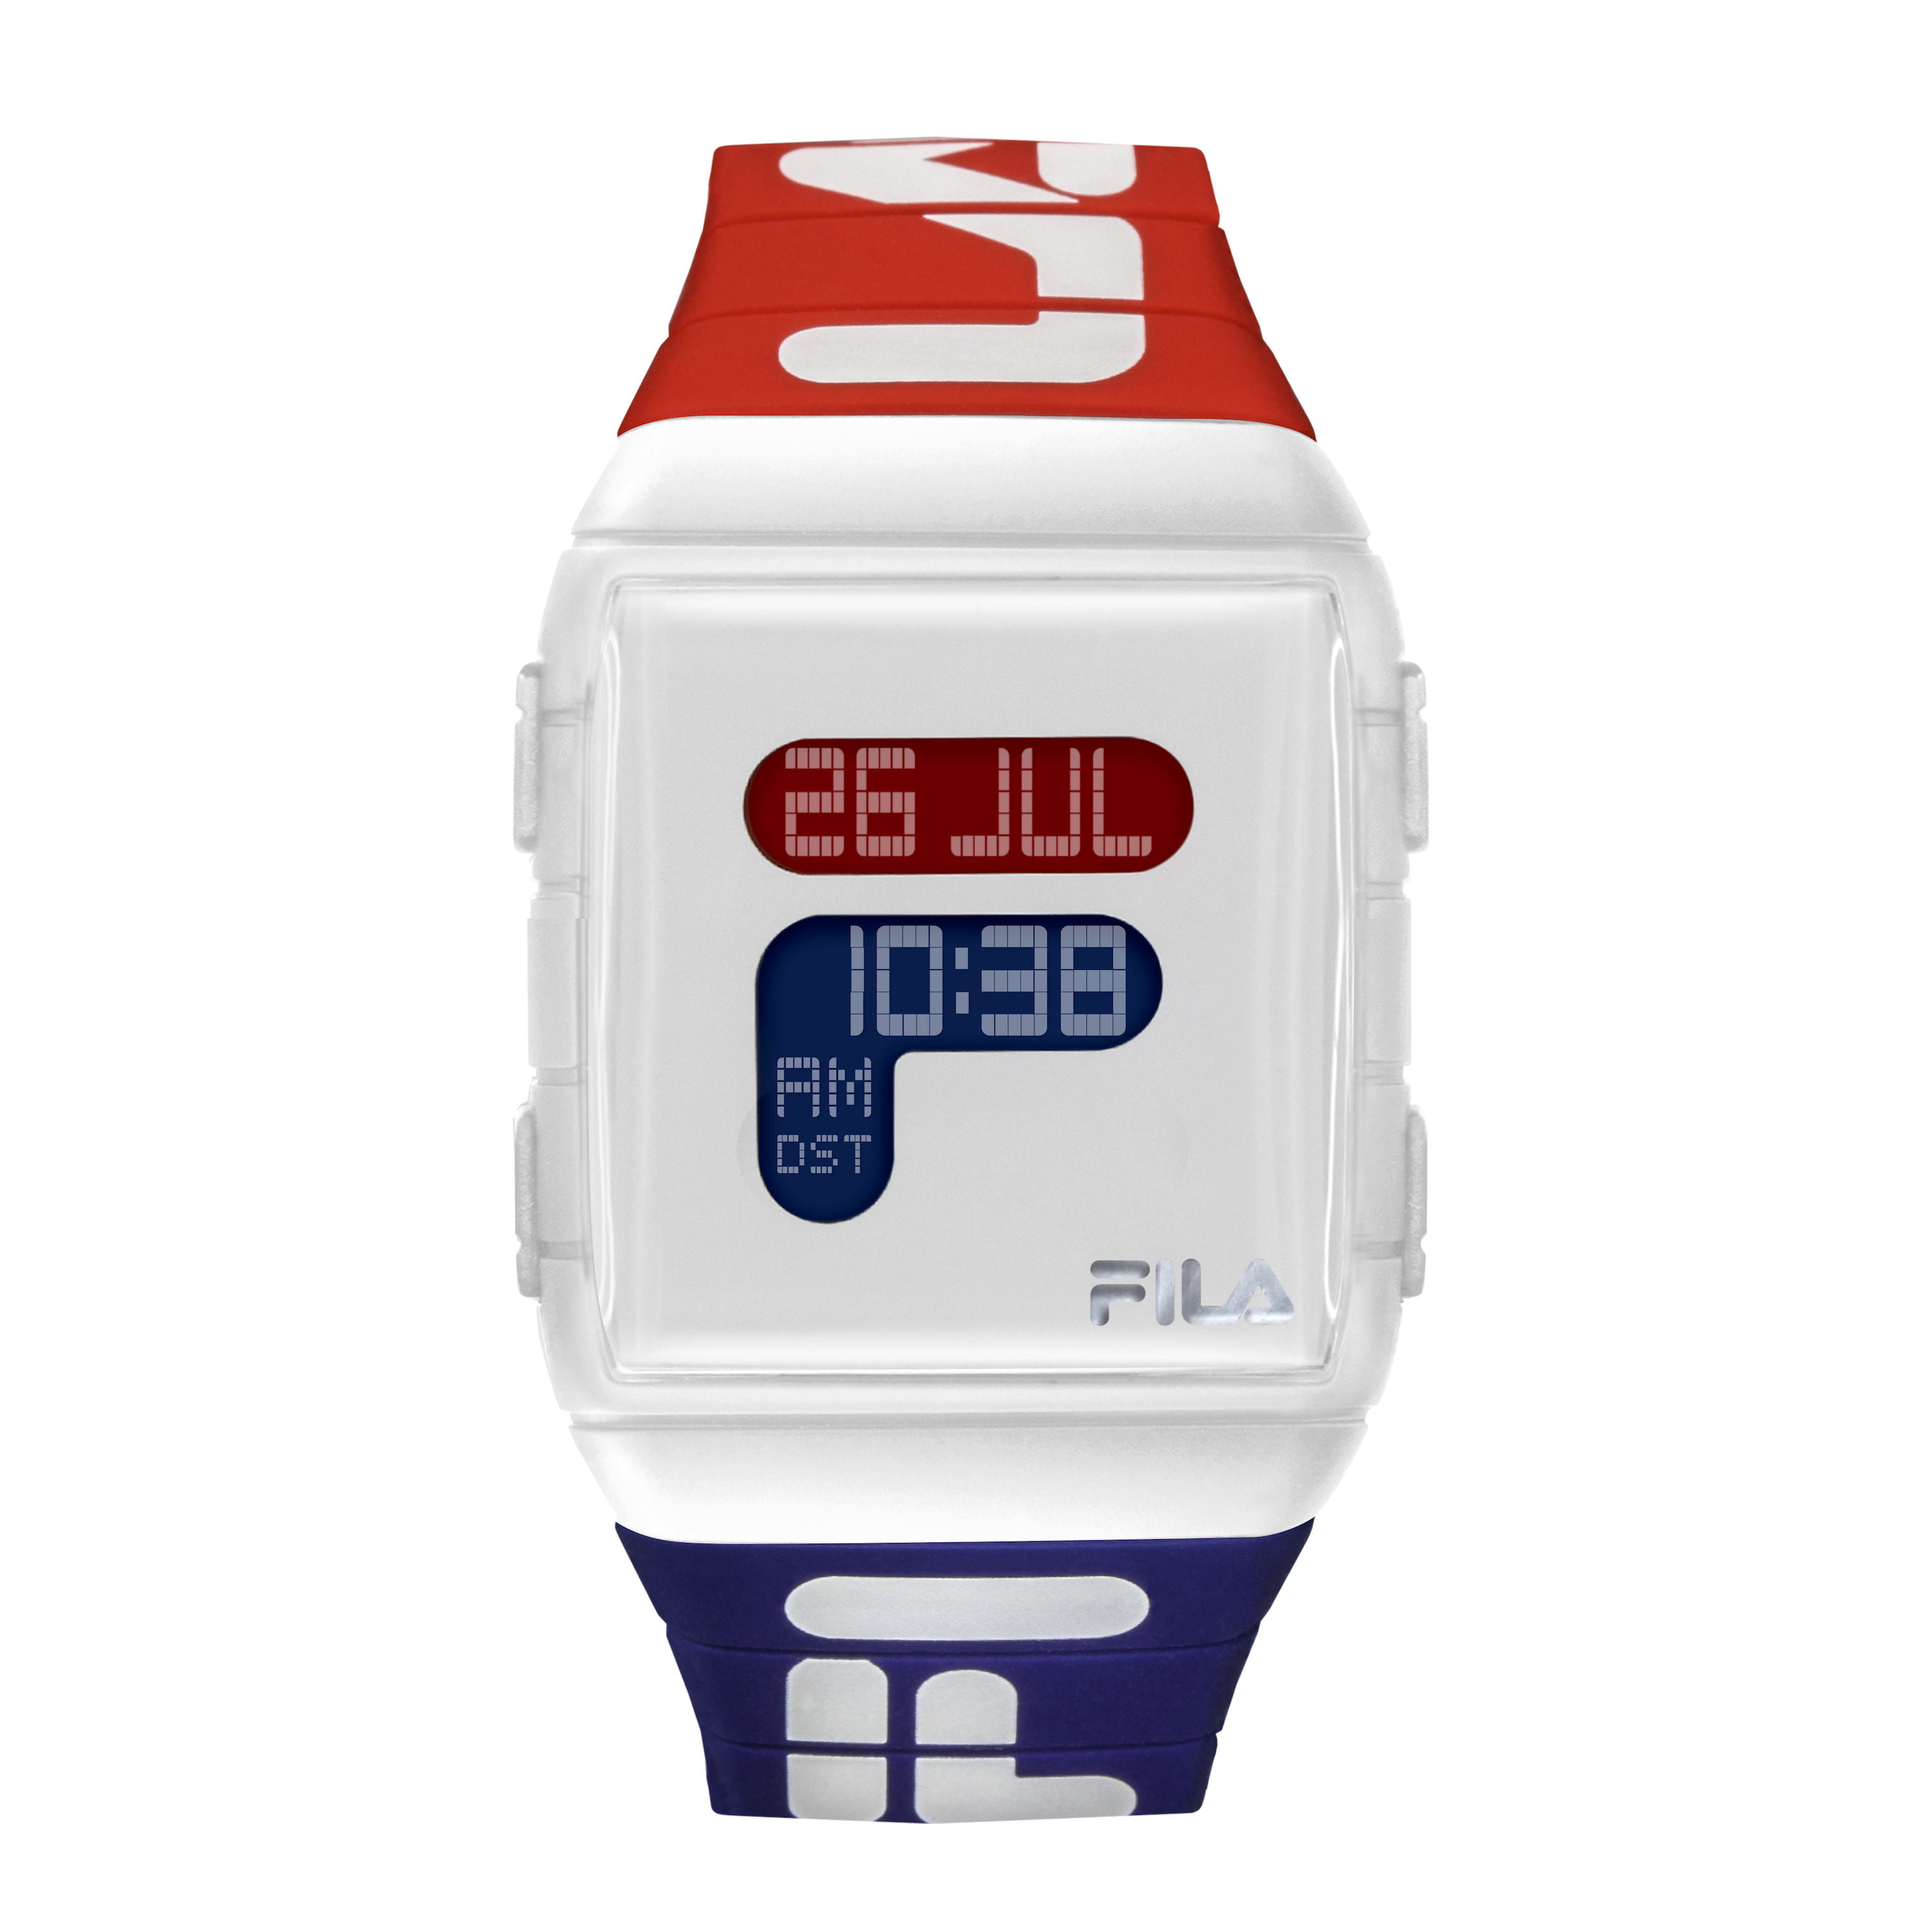 FILA Filastyle Classic White, and Blue Unisex Digital Watch 38-105-005